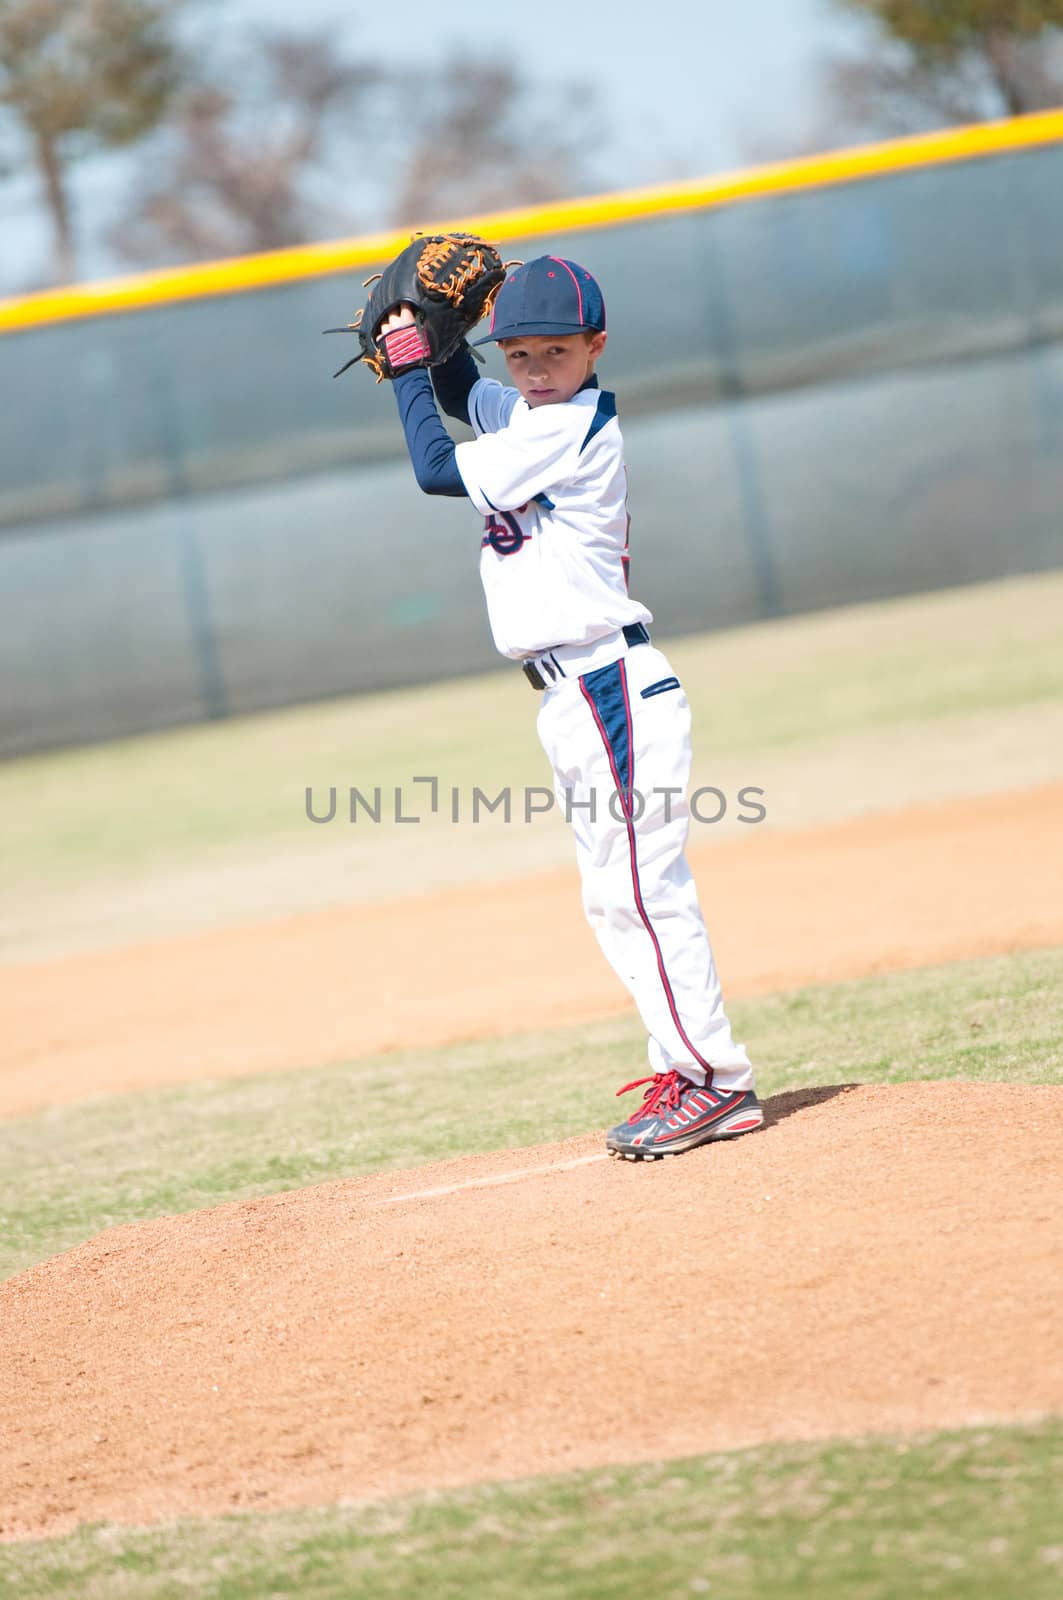 Little league pitcher starting his wind up to pitch to the ball.